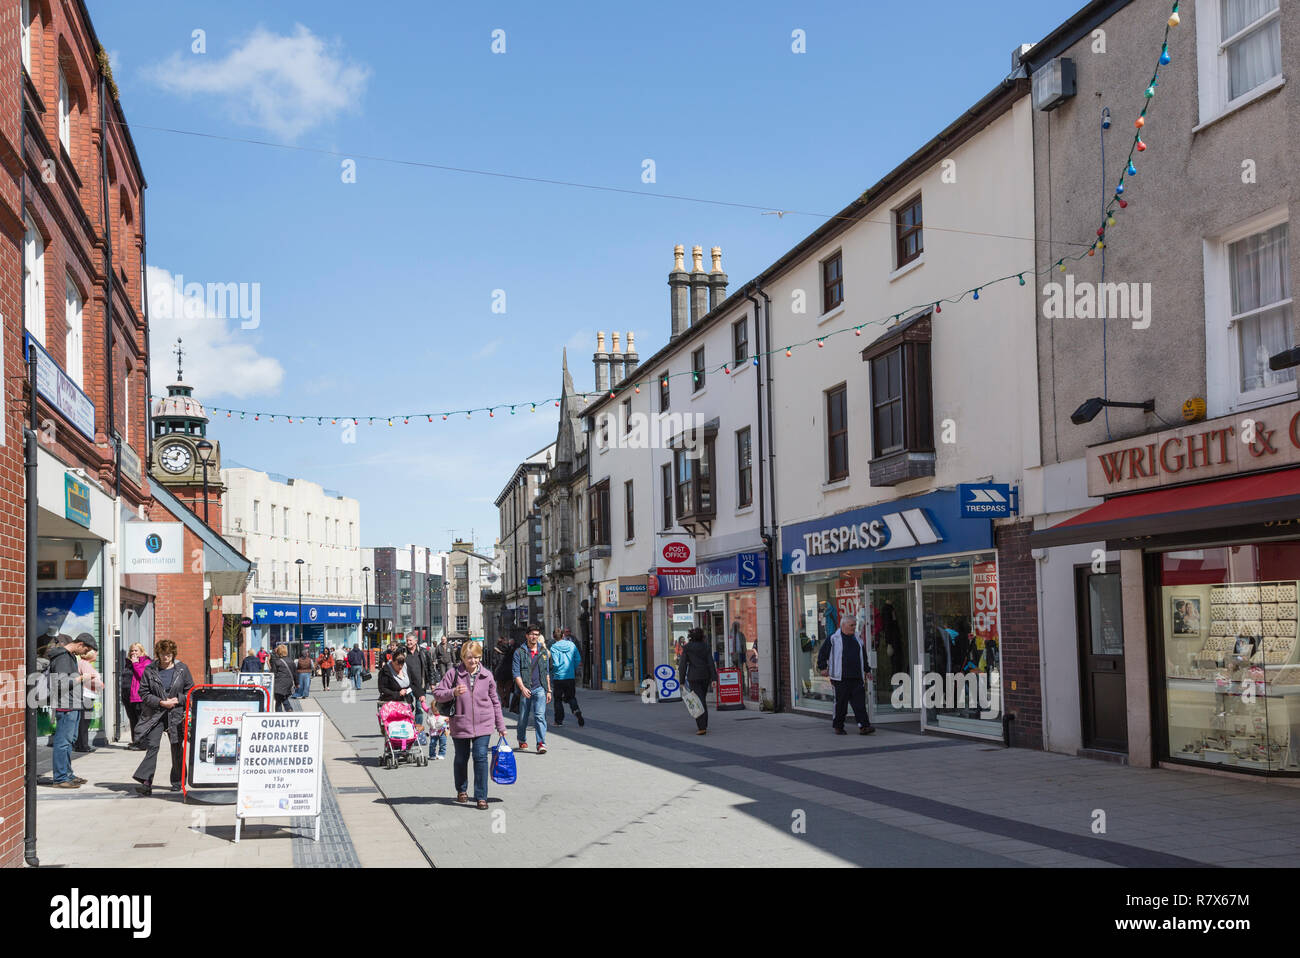 Street scene with people and shops in the city centre shopping precinct. High Street, Bangor, North Wales, UK, Great Britain Stock Photo